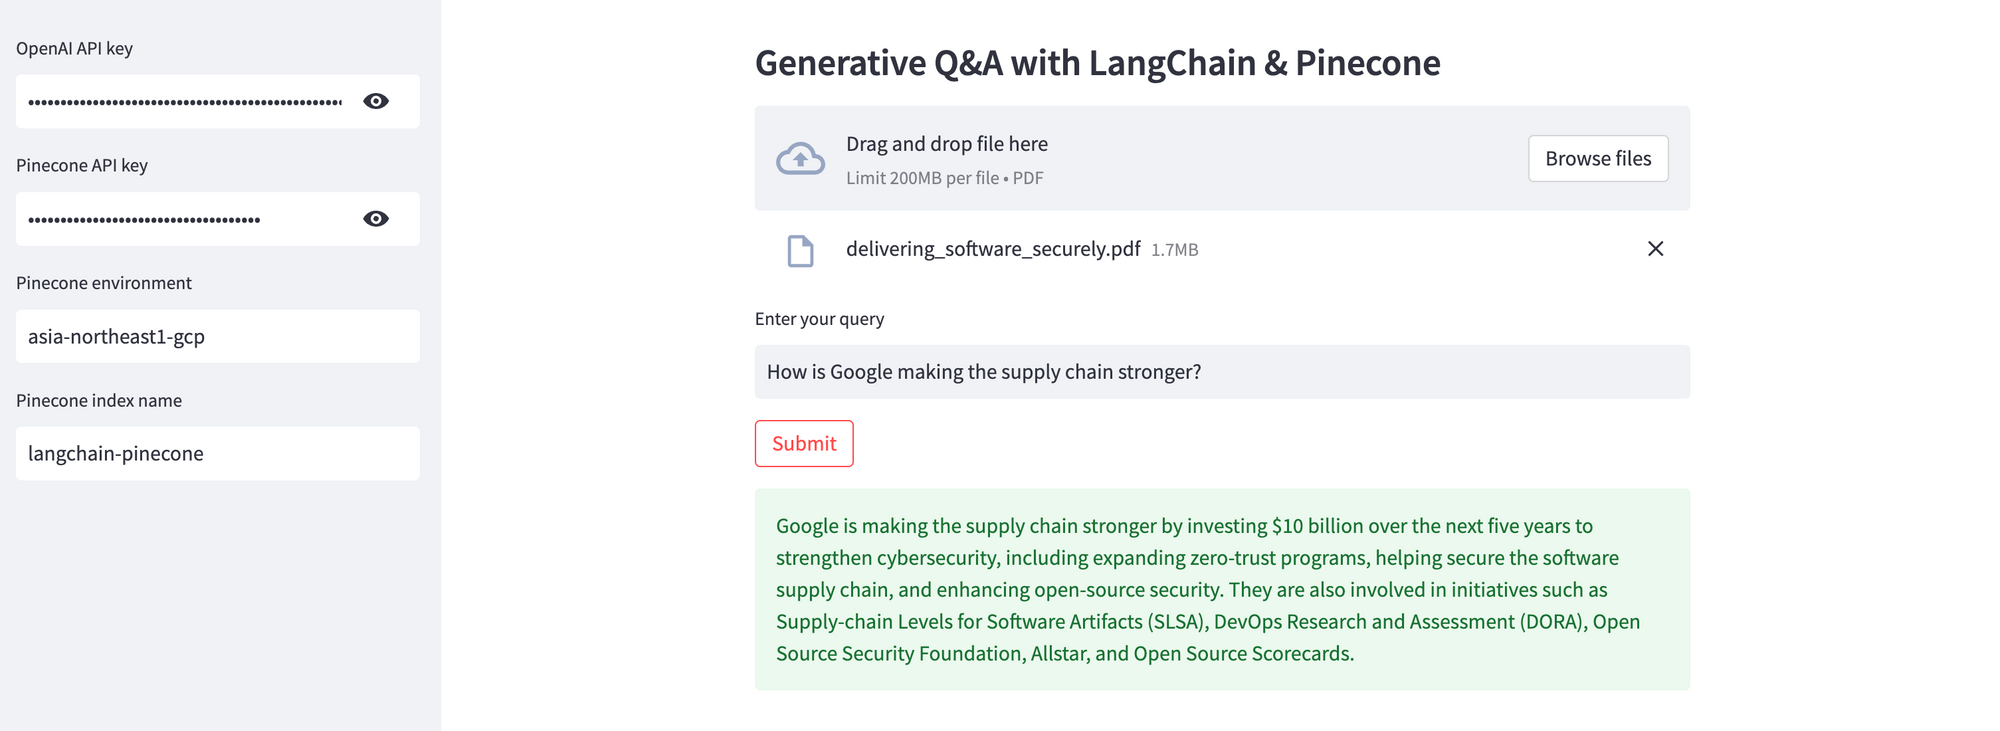 Sample question-answering with LangChain and Pinecone